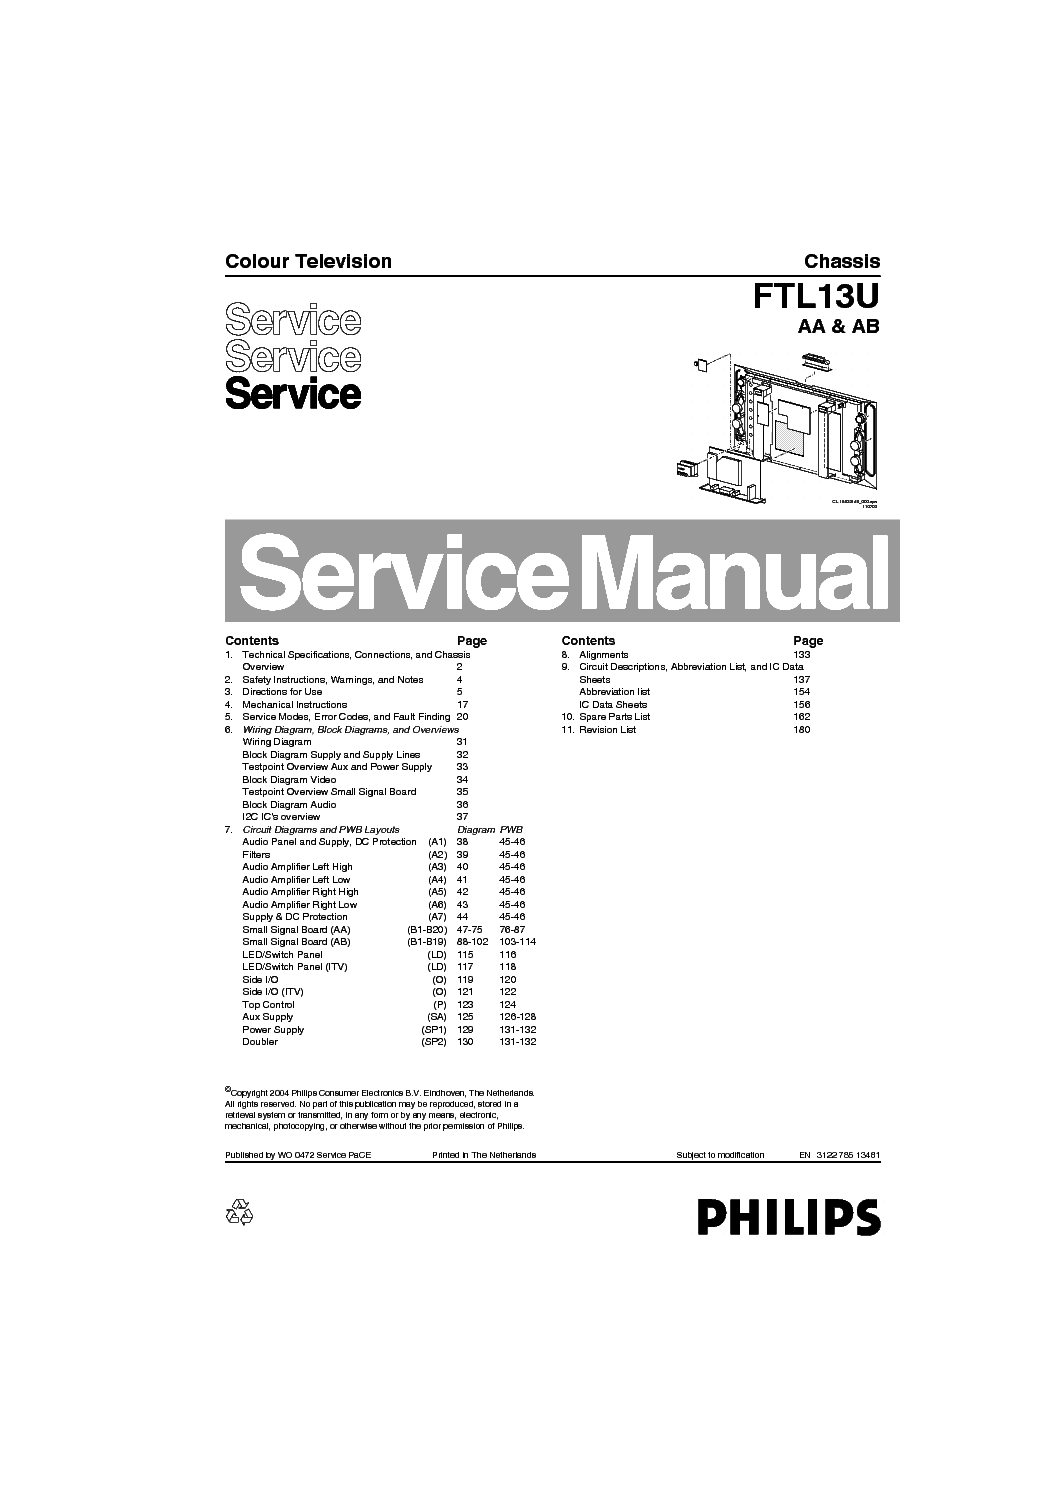 PHILIPS CHASSIS FTL13U AA AB service manual (1st page)